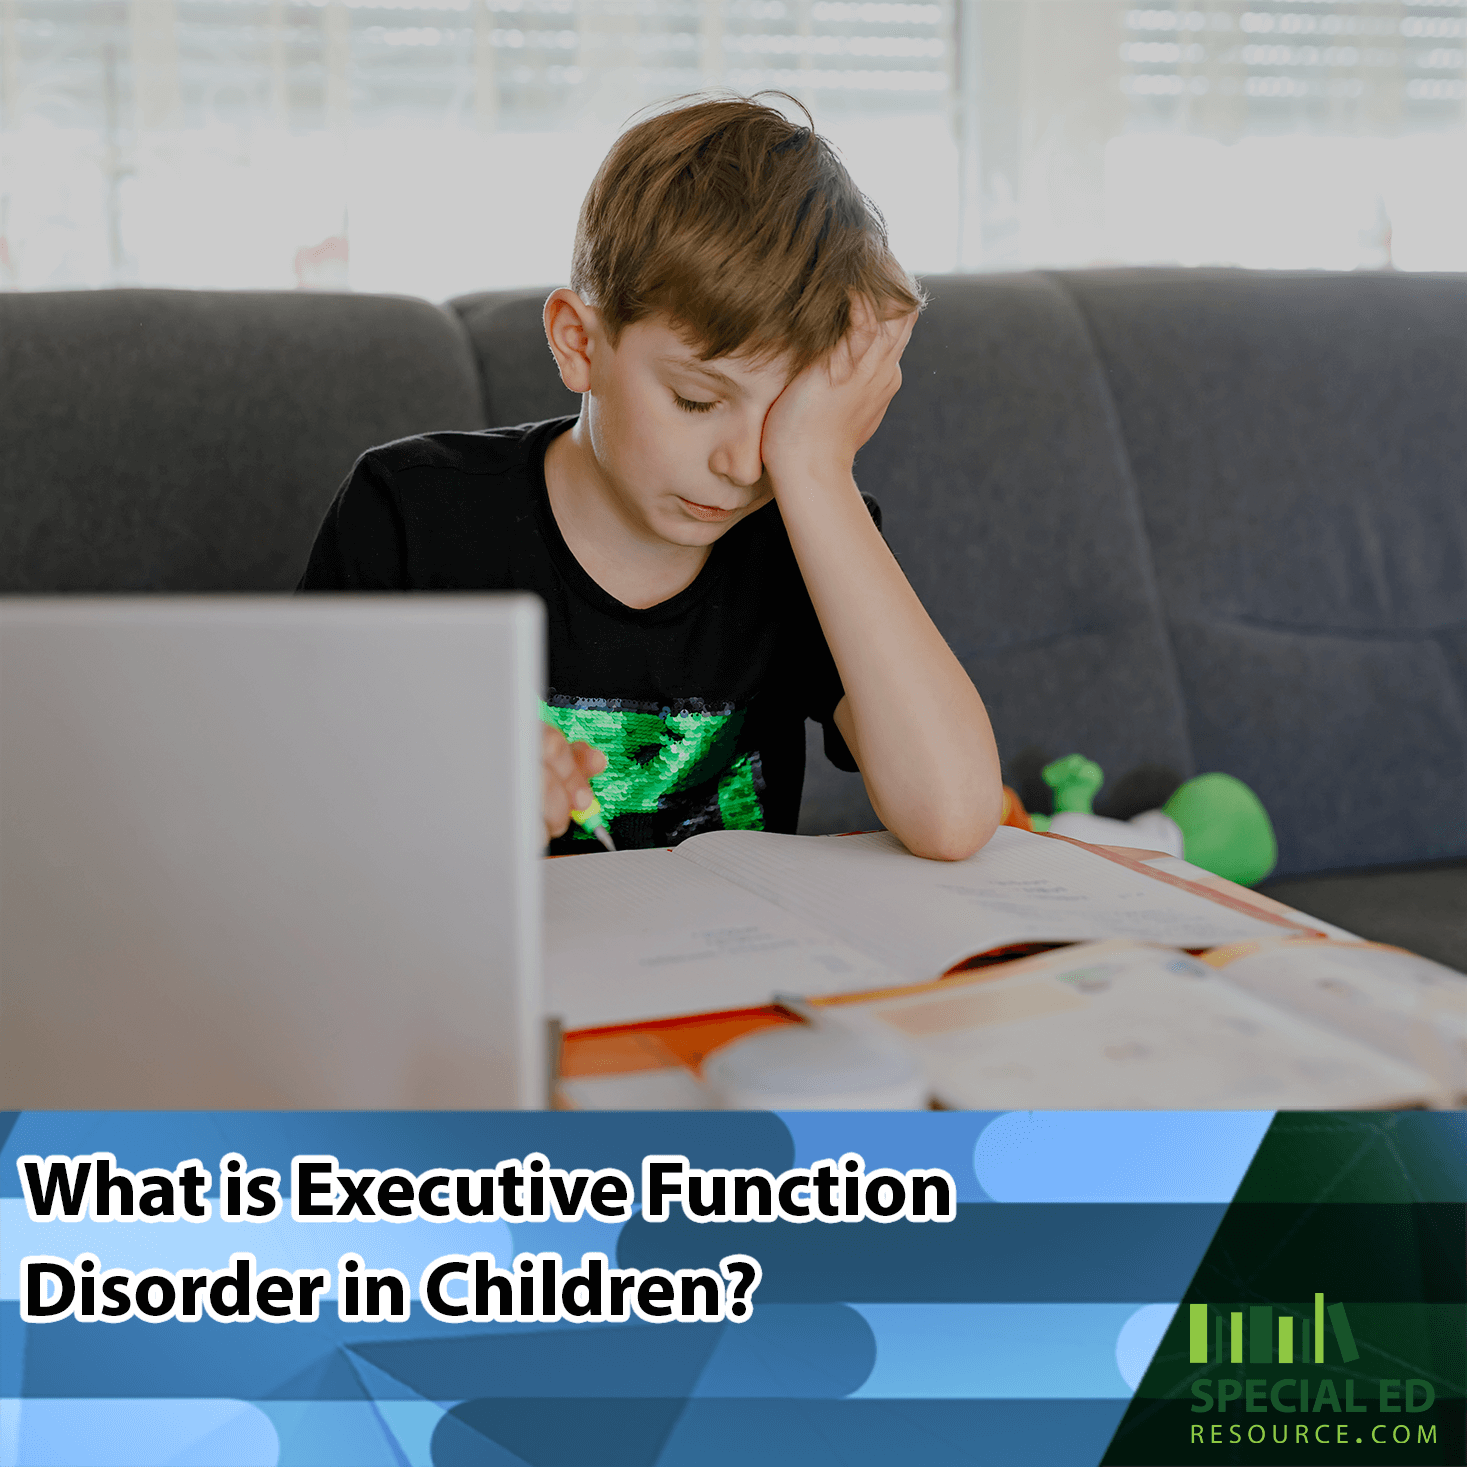 A frustrated young boy sits on a couch at home in front of a laptop, hand on forehead, with papers and a book spread out on a desk. Above him is the question 'What is Executive Function Disorder in Children?' on a blue overlay, with the logo for SpecialEdResource.com at the bottom right.